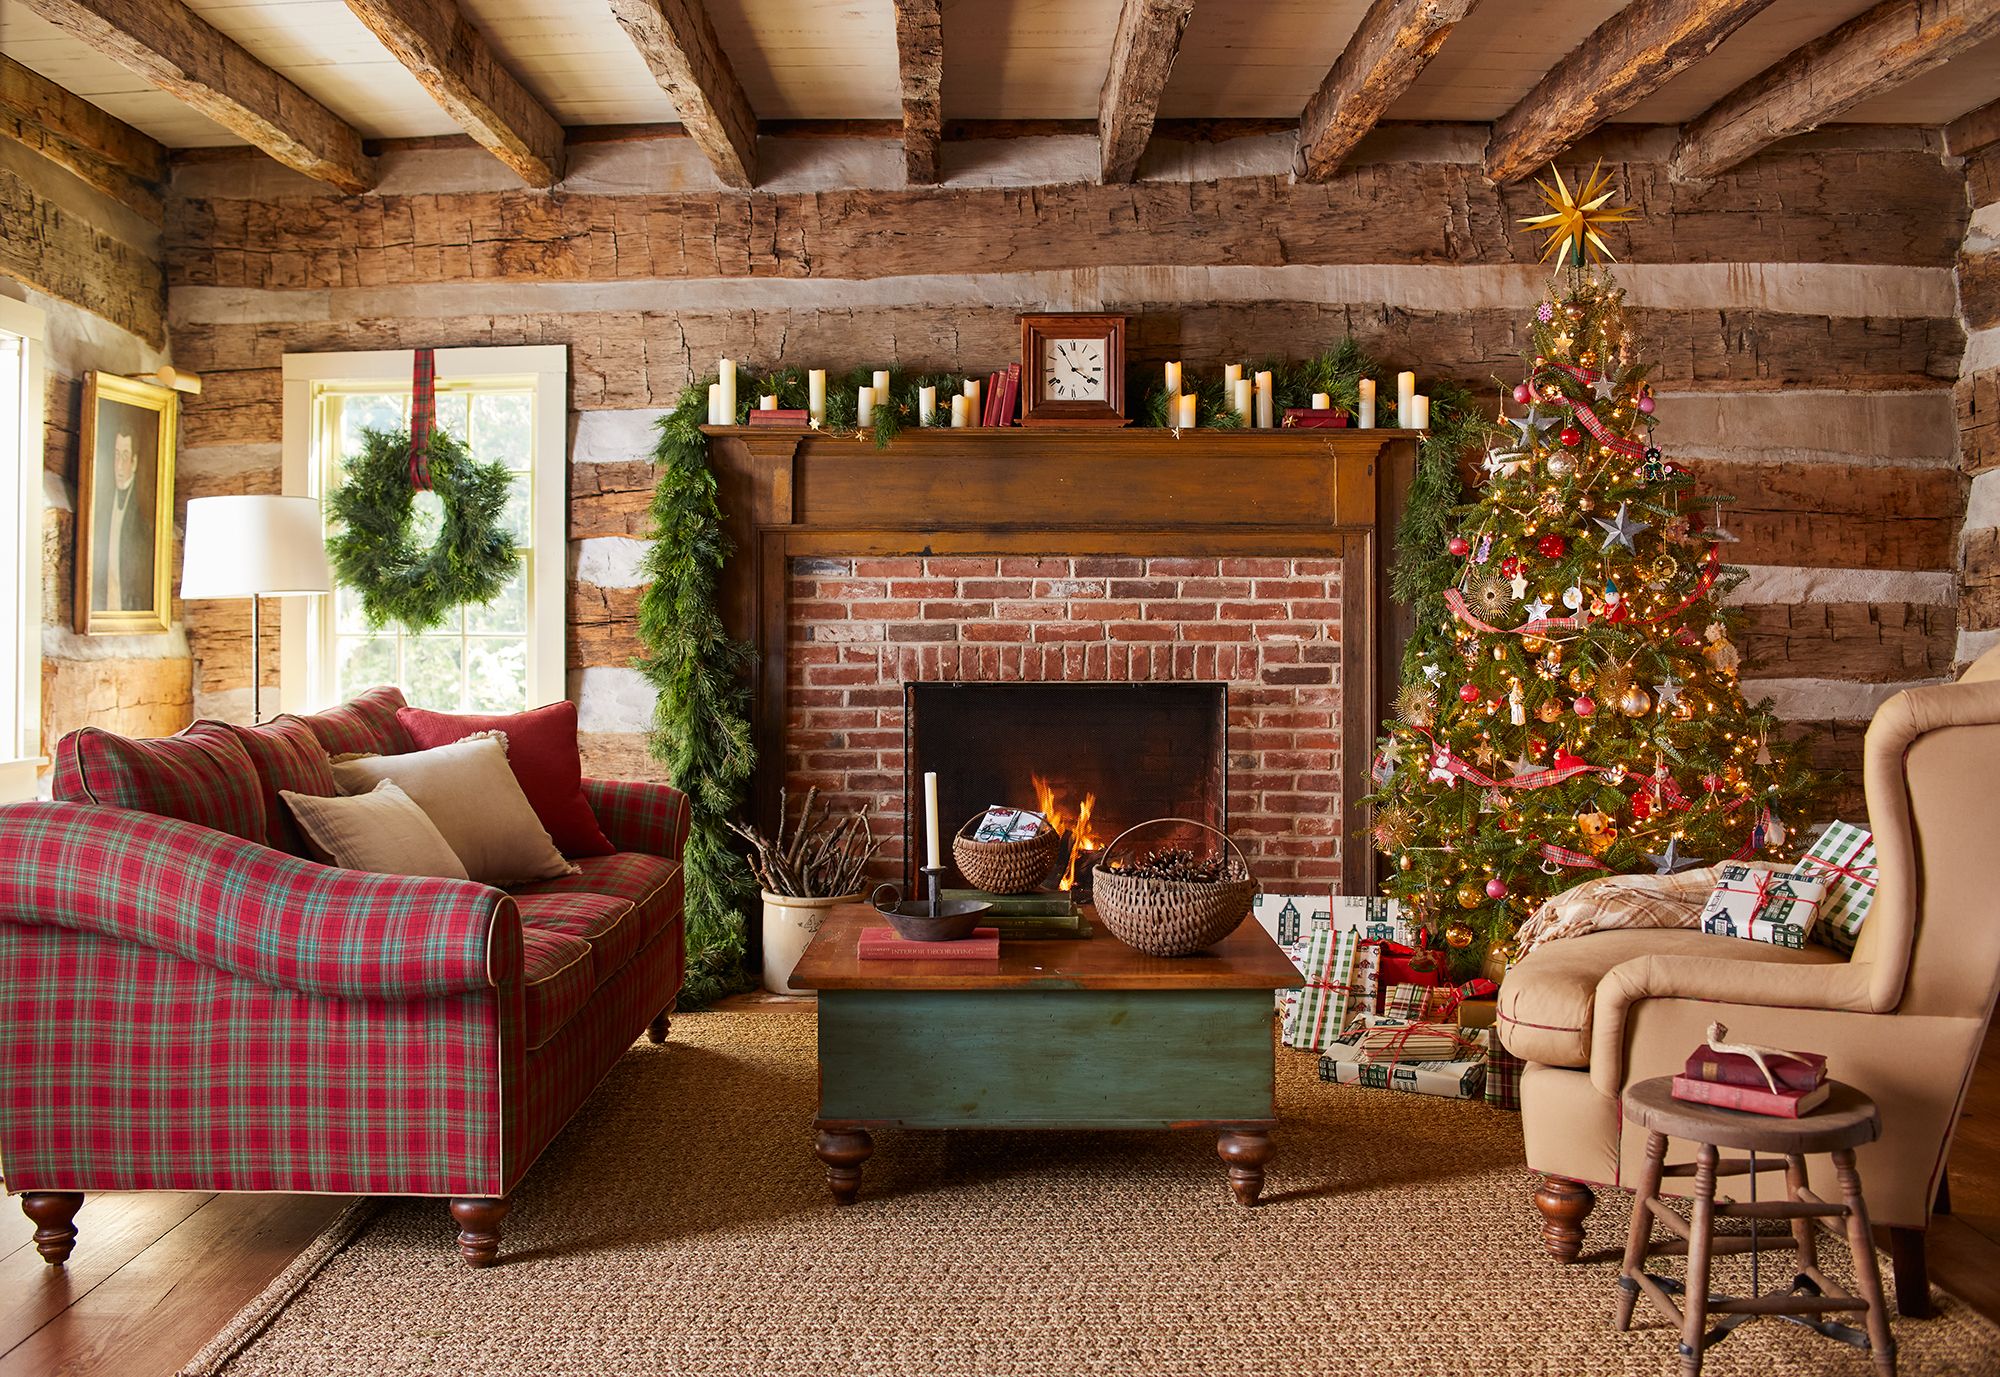 Rustic Christmas Tree Ideas Dylan Chandler 1638292404 